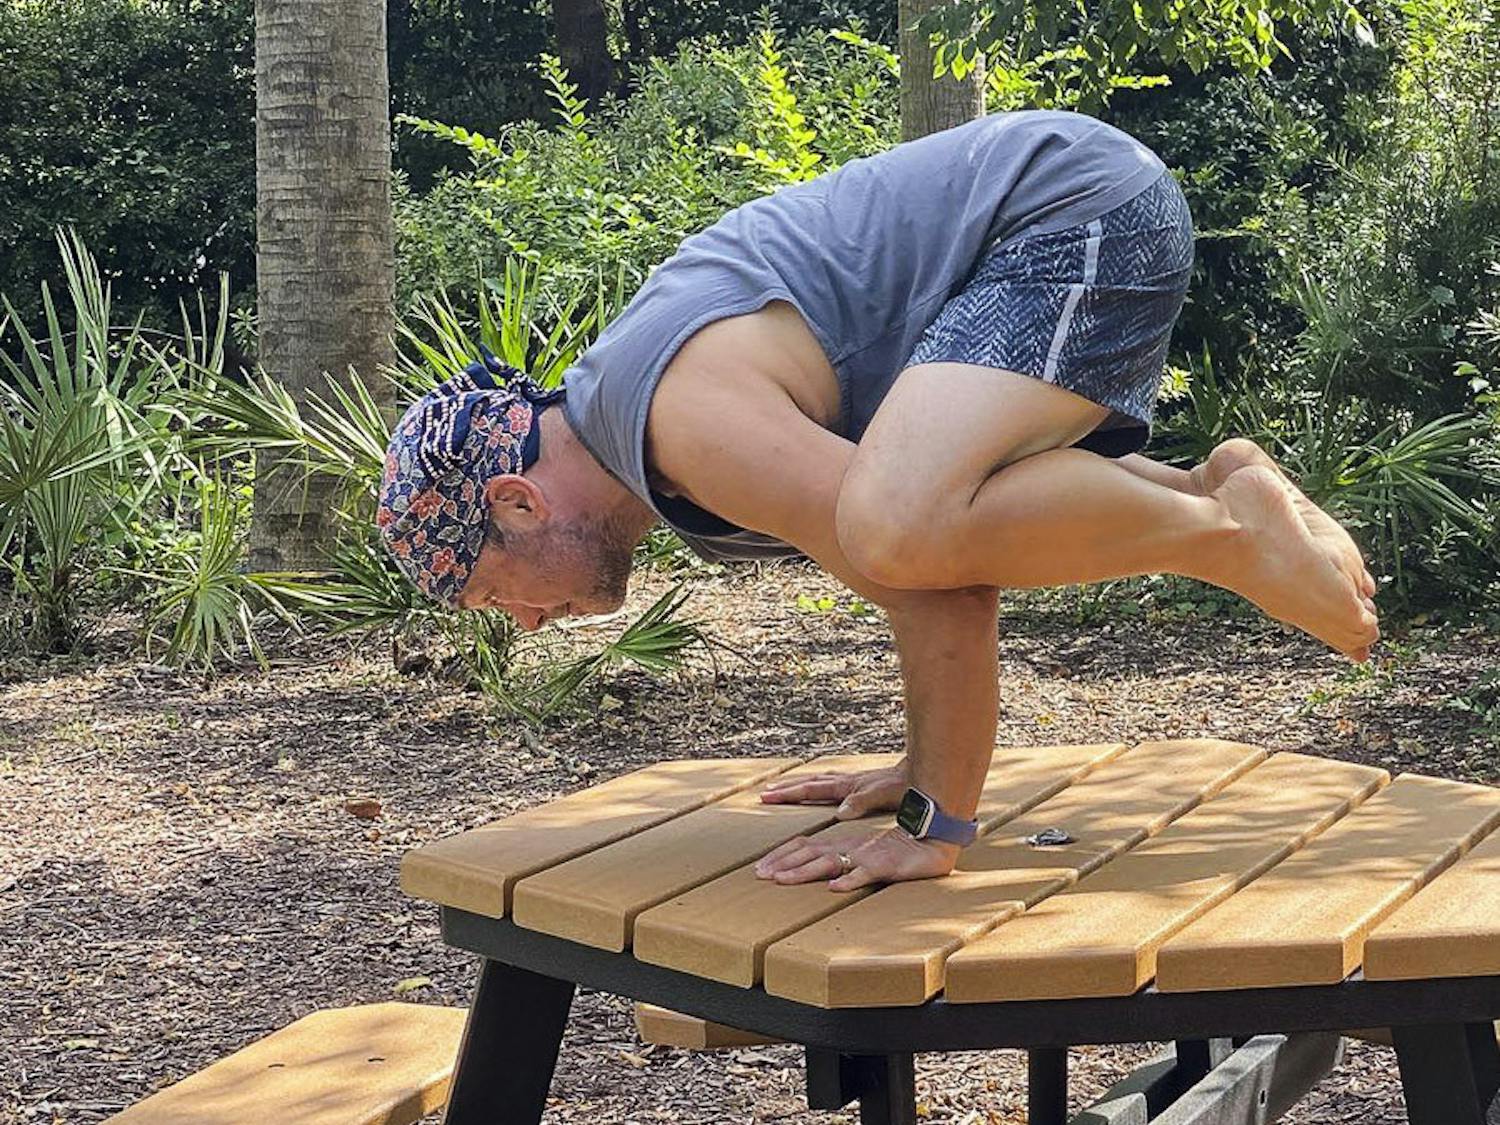 David Moscowitz, a professor at the School of Journalism and Mass Communications stands in the Bakasana yoga pose, a.k.a. the Crow Pose. Moscowitz offers donation-funded yoga lessons at Rooted Yoga, on Sunday afternoons.&nbsp;